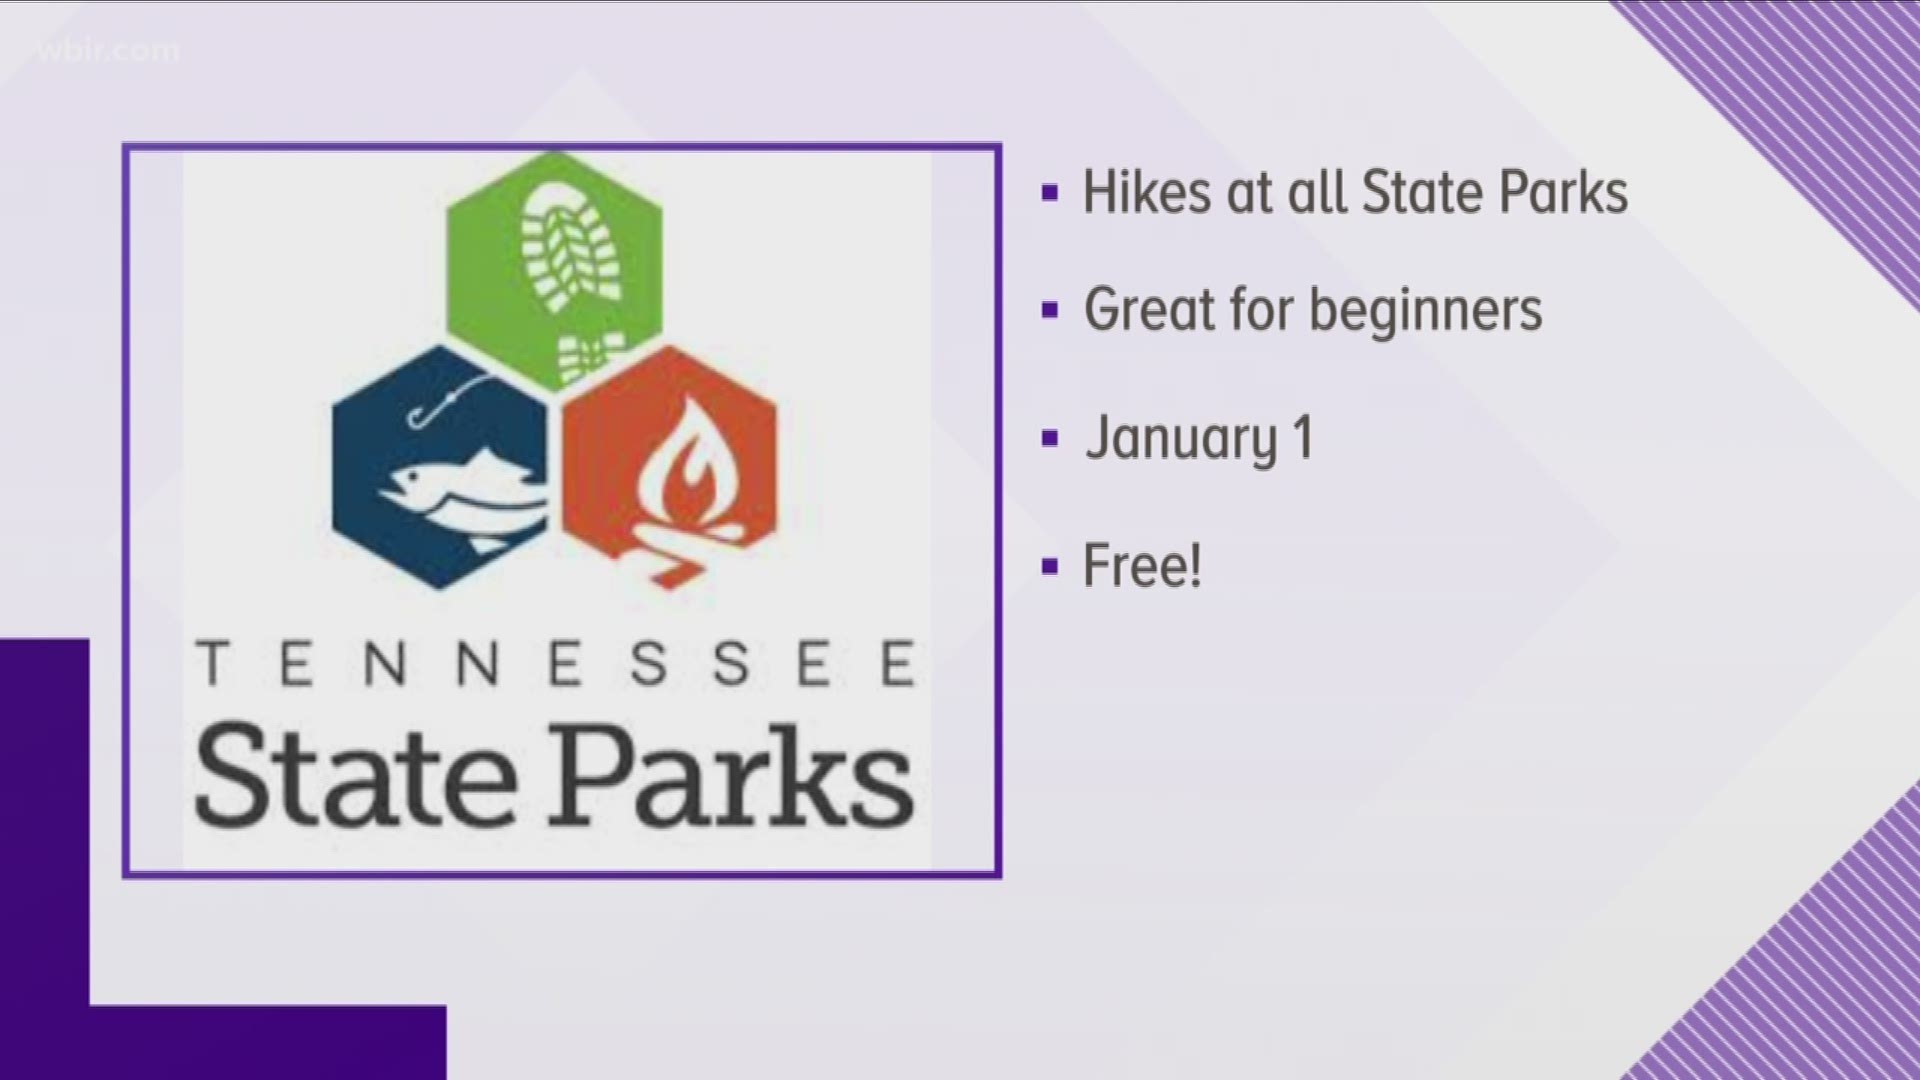 Each Tennessee State Park will host guided hikes on New Years Day.